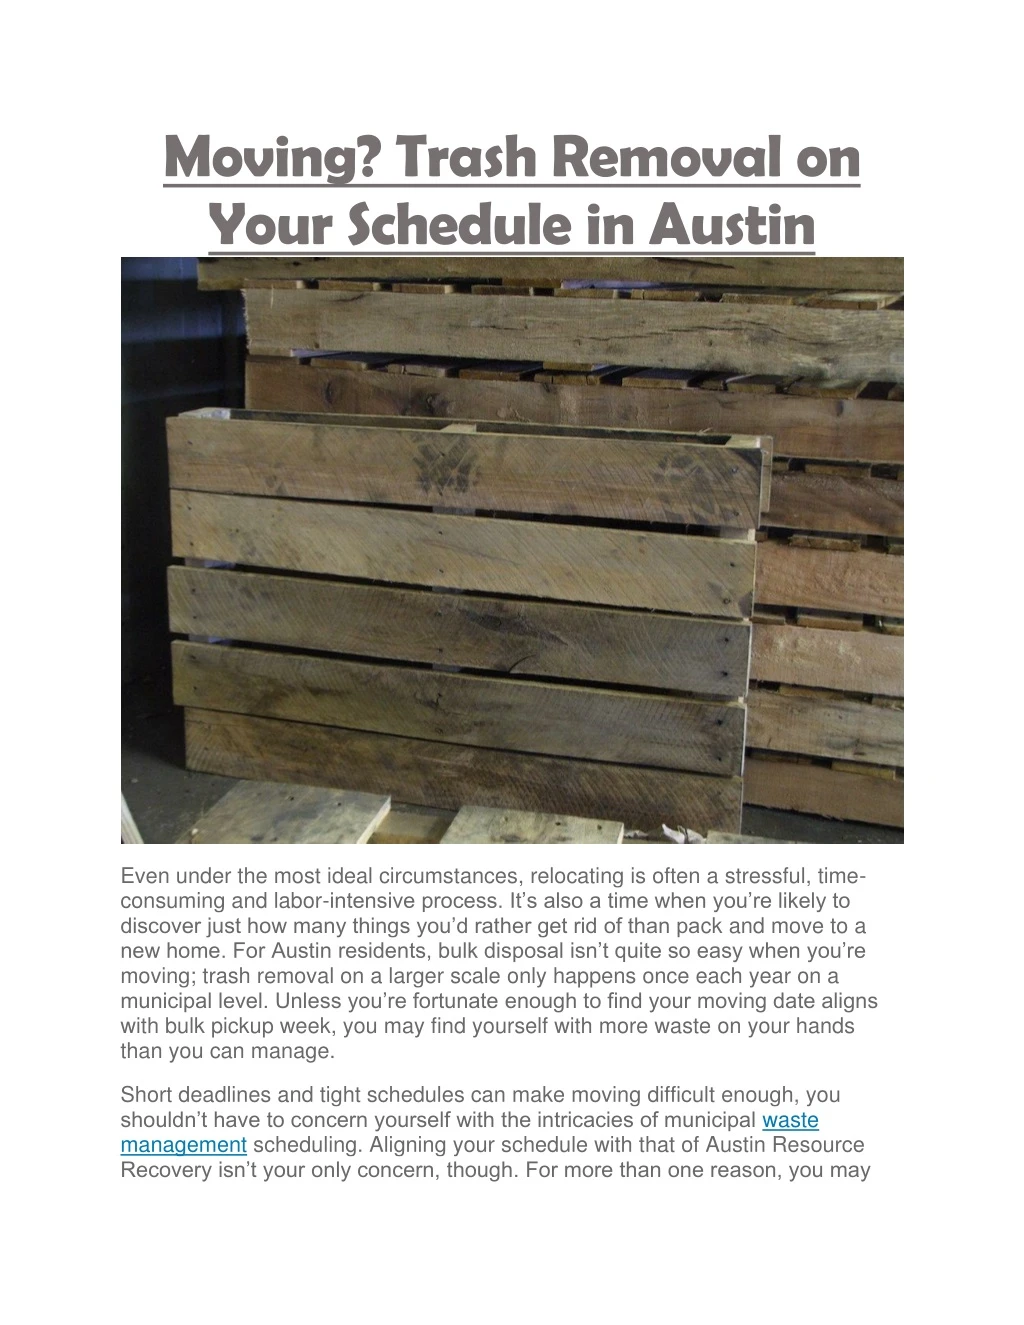 moving trash removal on your schedule in austin